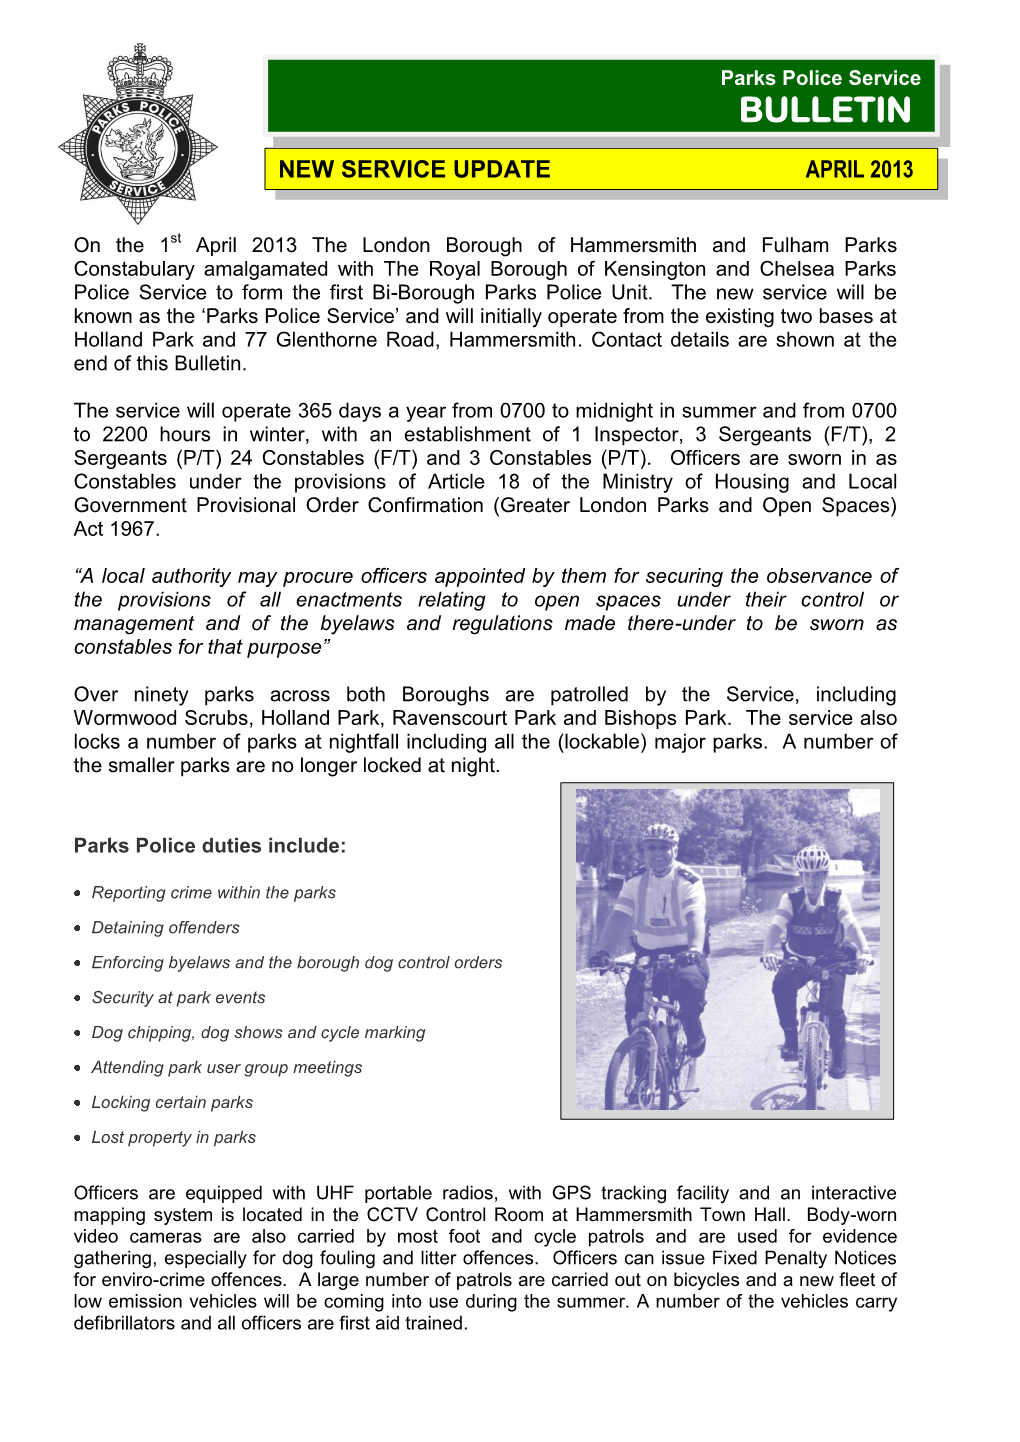 Download the Parks Police Service Bulletin